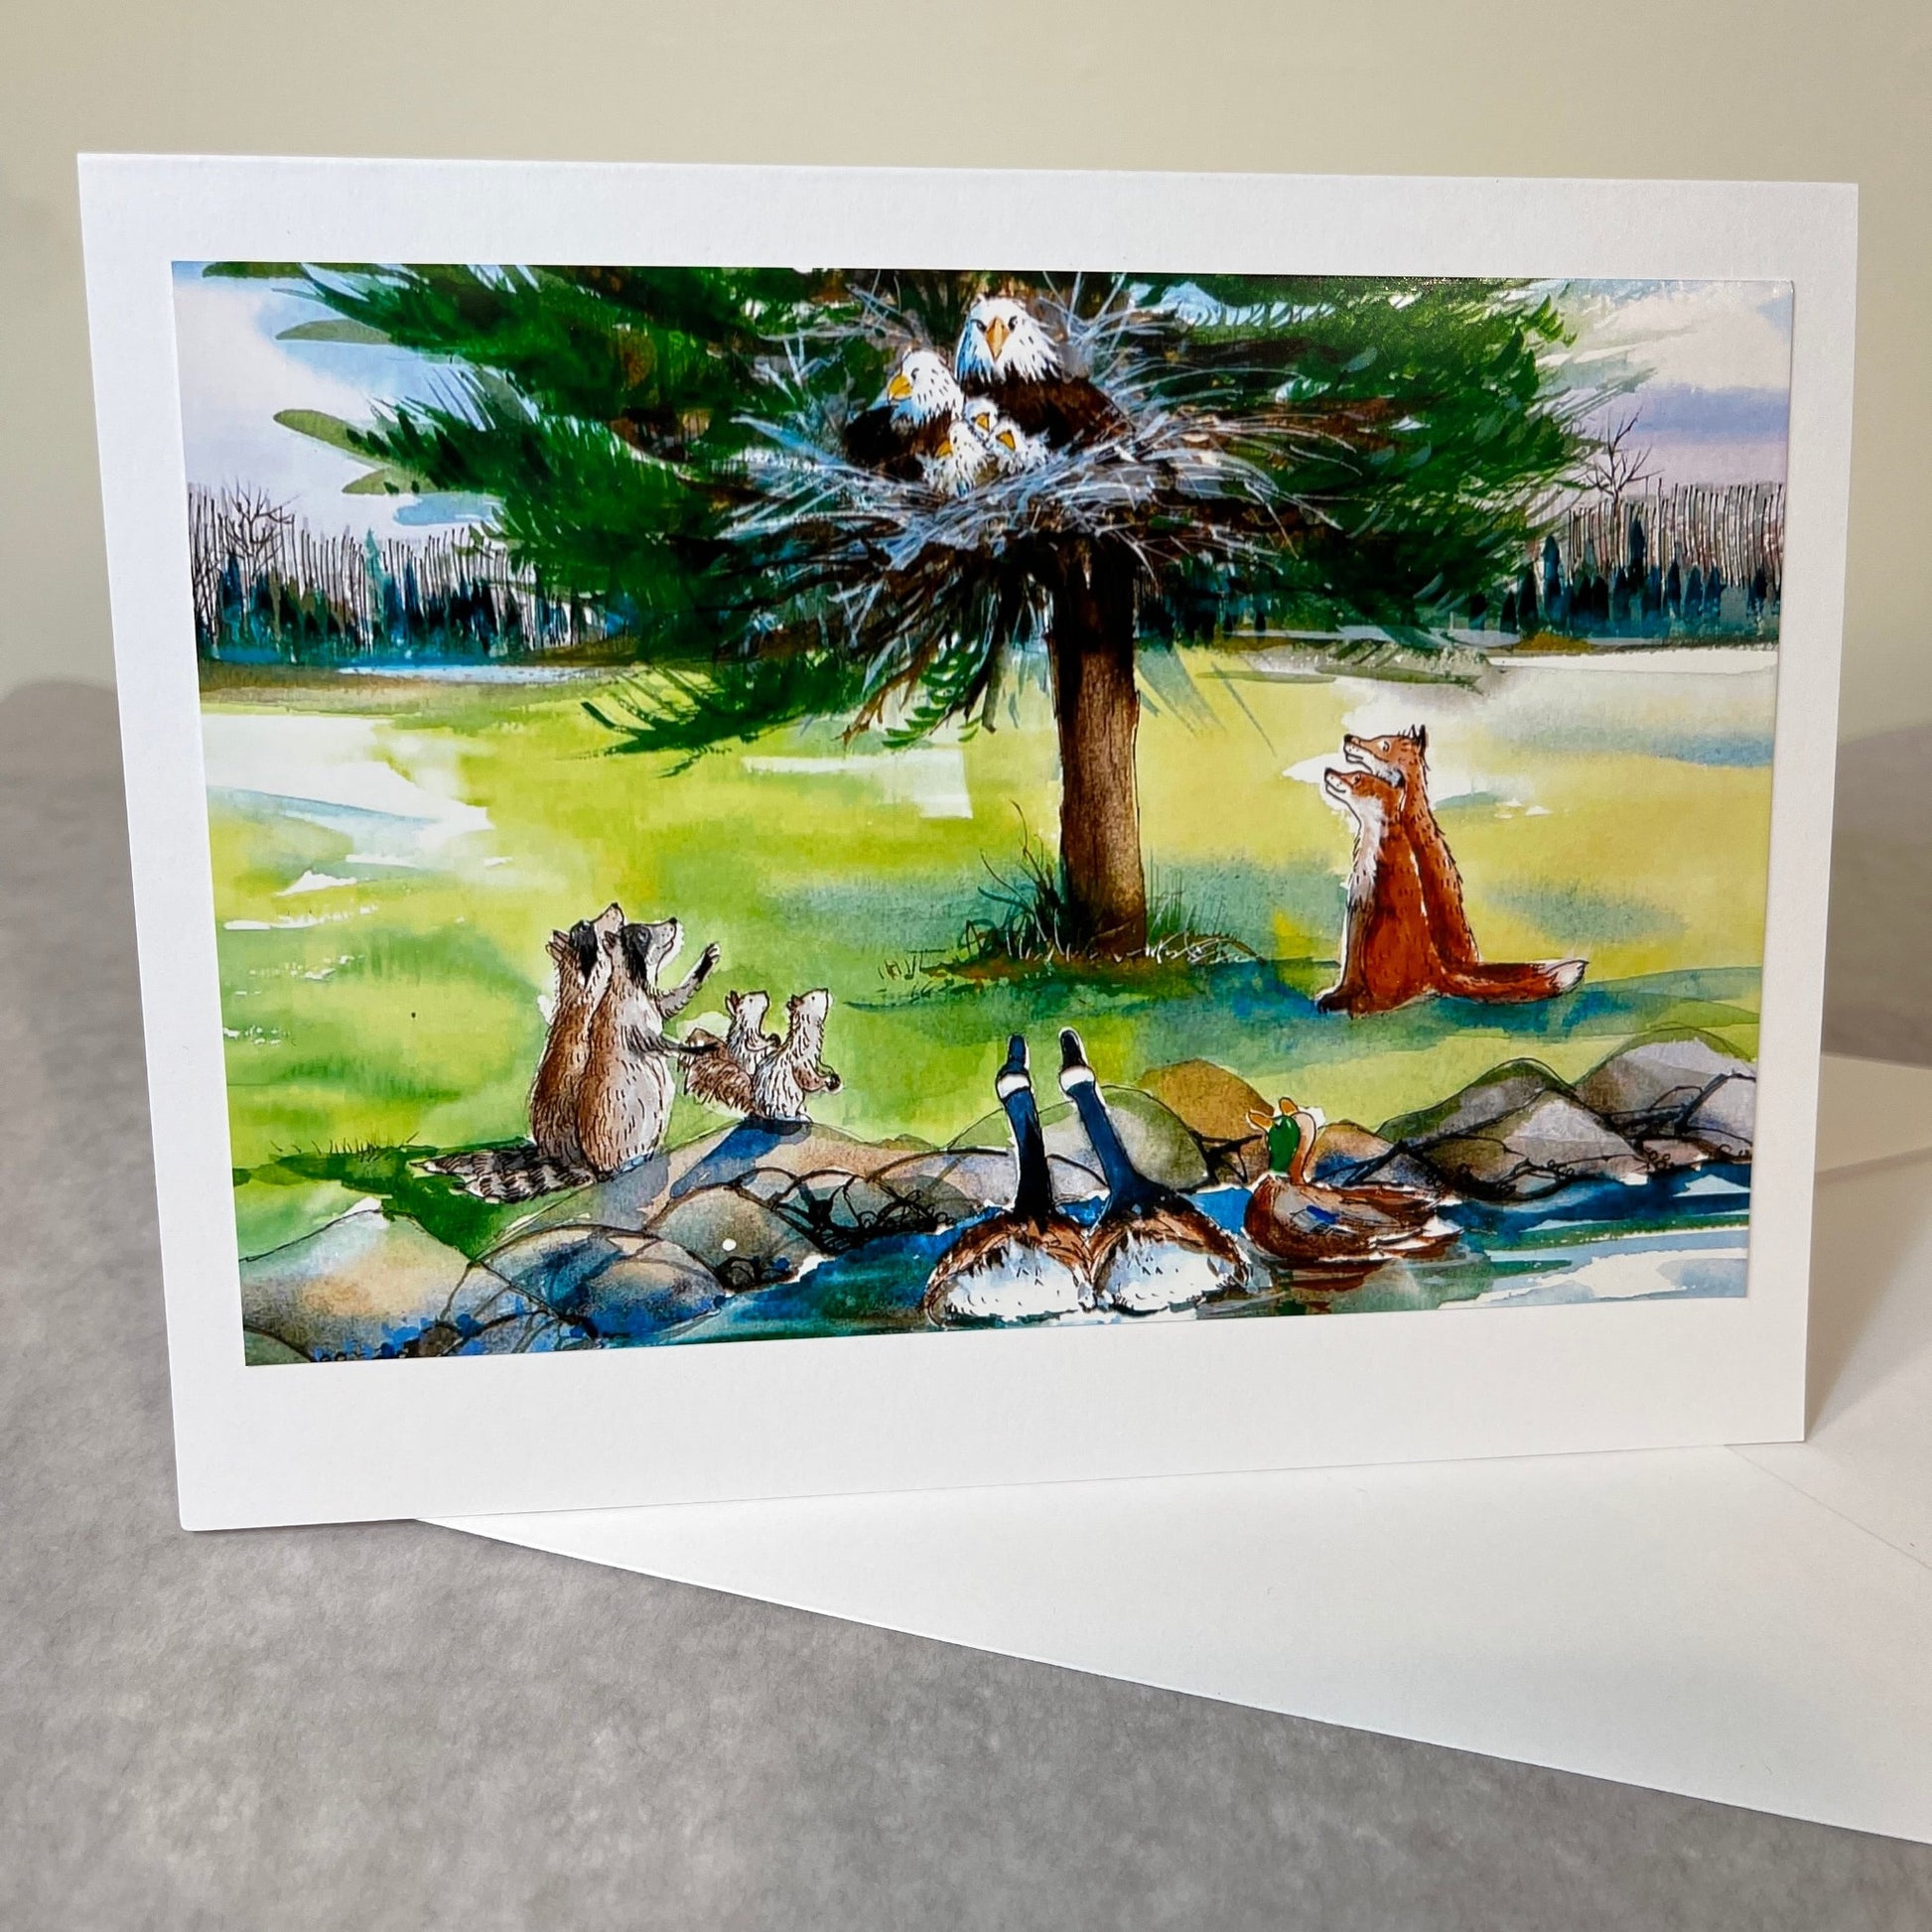 eagles story time with animals gathered photo note card with envelope illustration from Hop Onward Rabbit Rabbit book